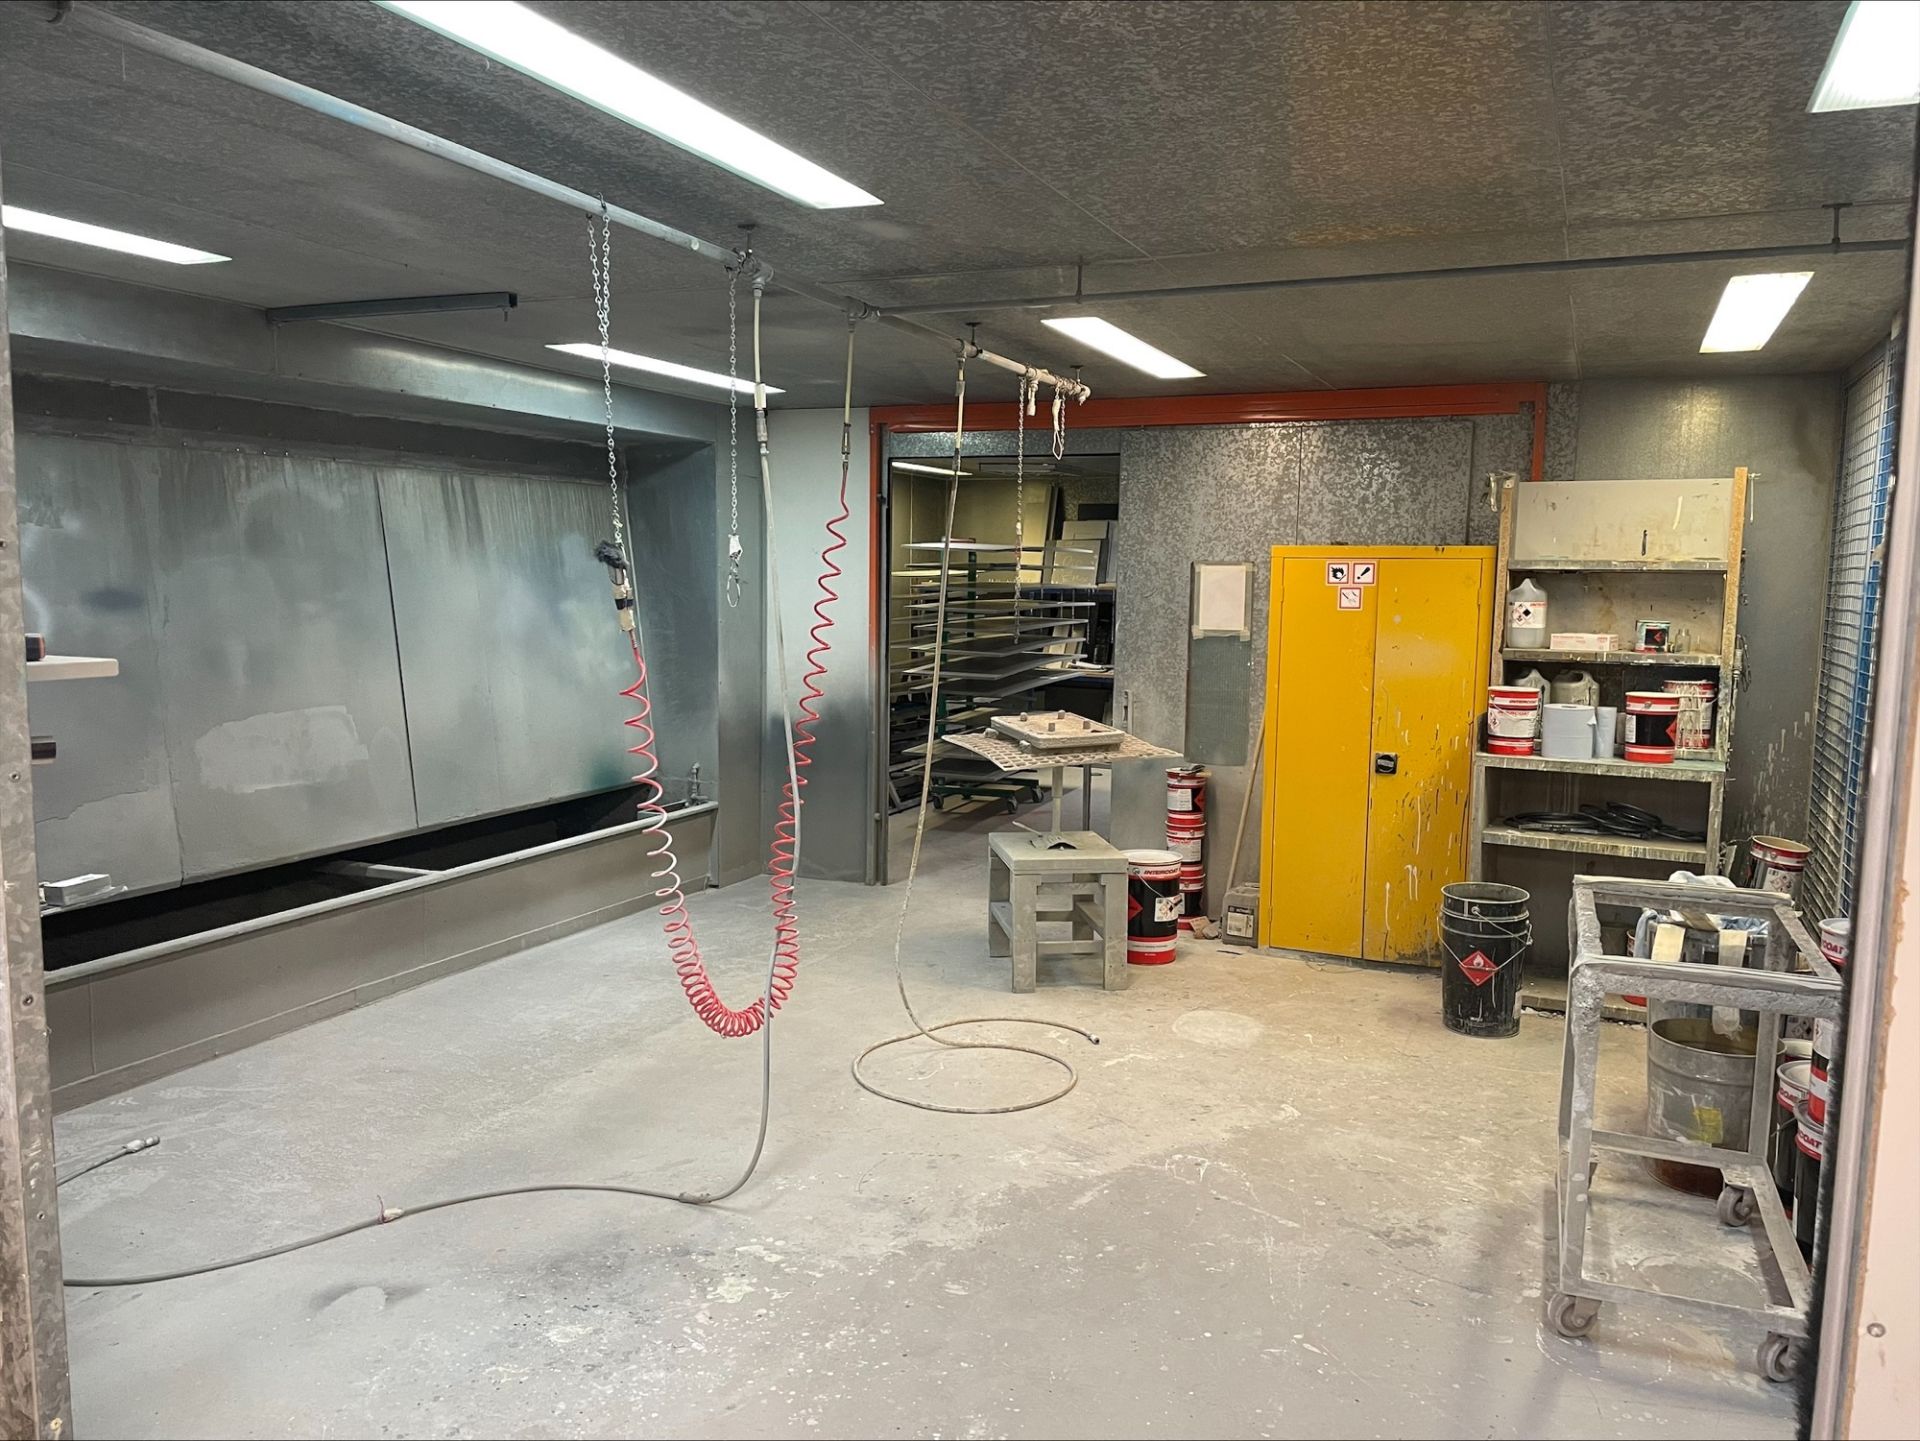 Schuberts Technical Services Limited Free standing/sectional 3 zone spray room and oven system - Bild 7 aus 10